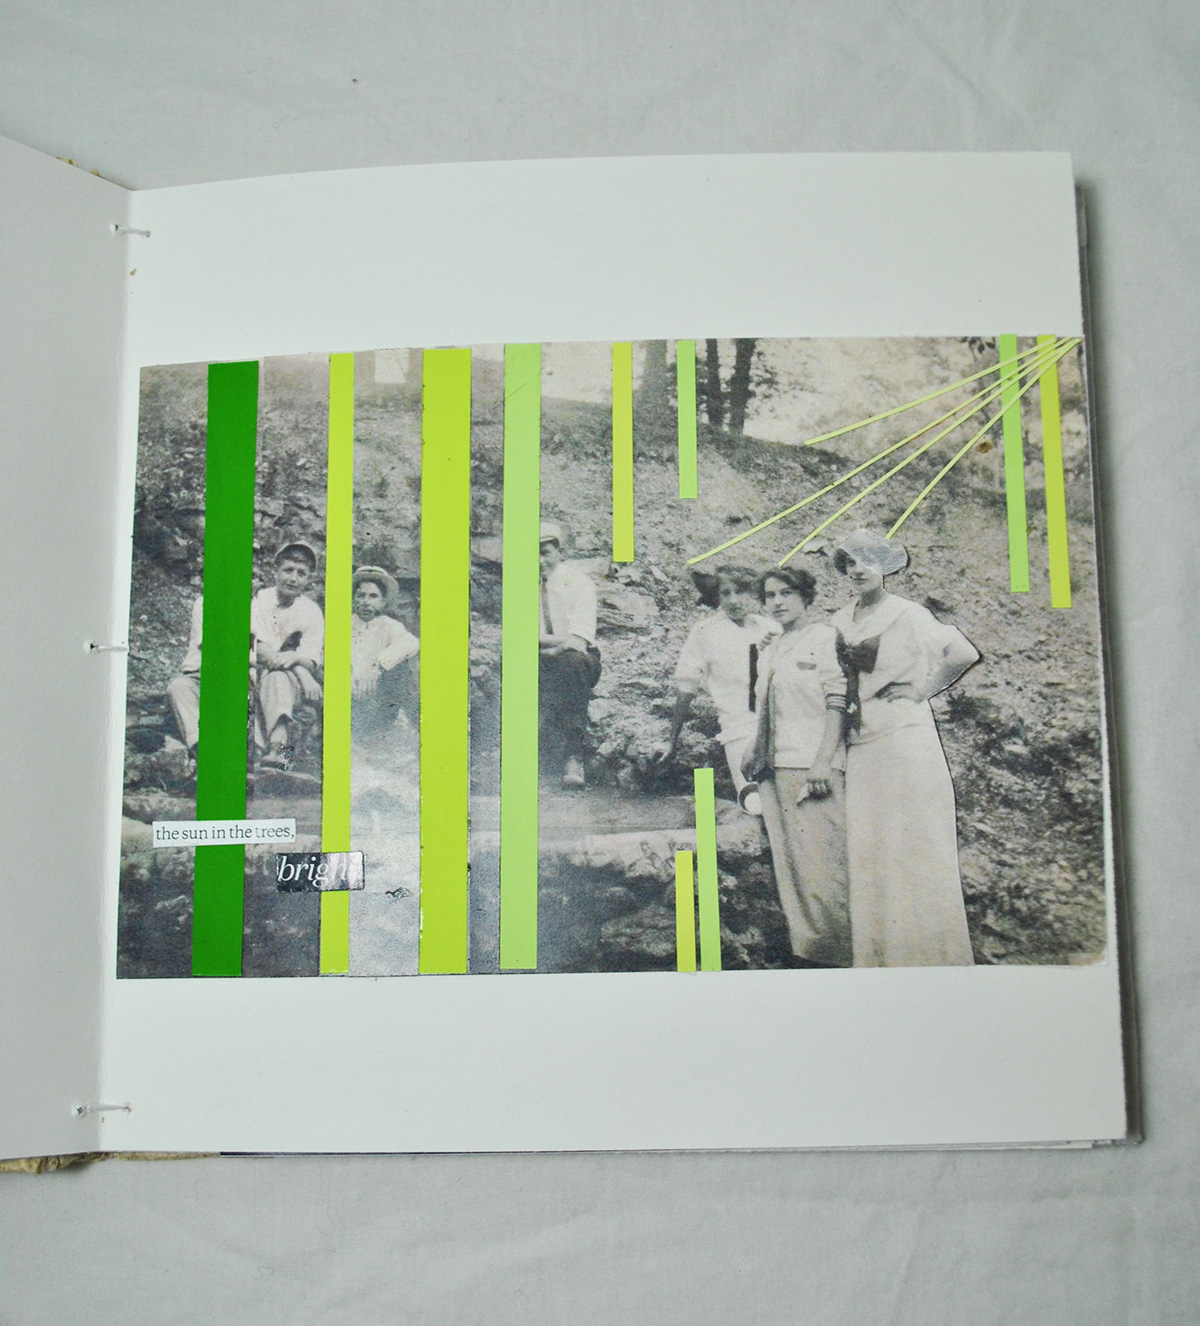 book collage text photos graphic design color thoughts emotions memories family history color theory